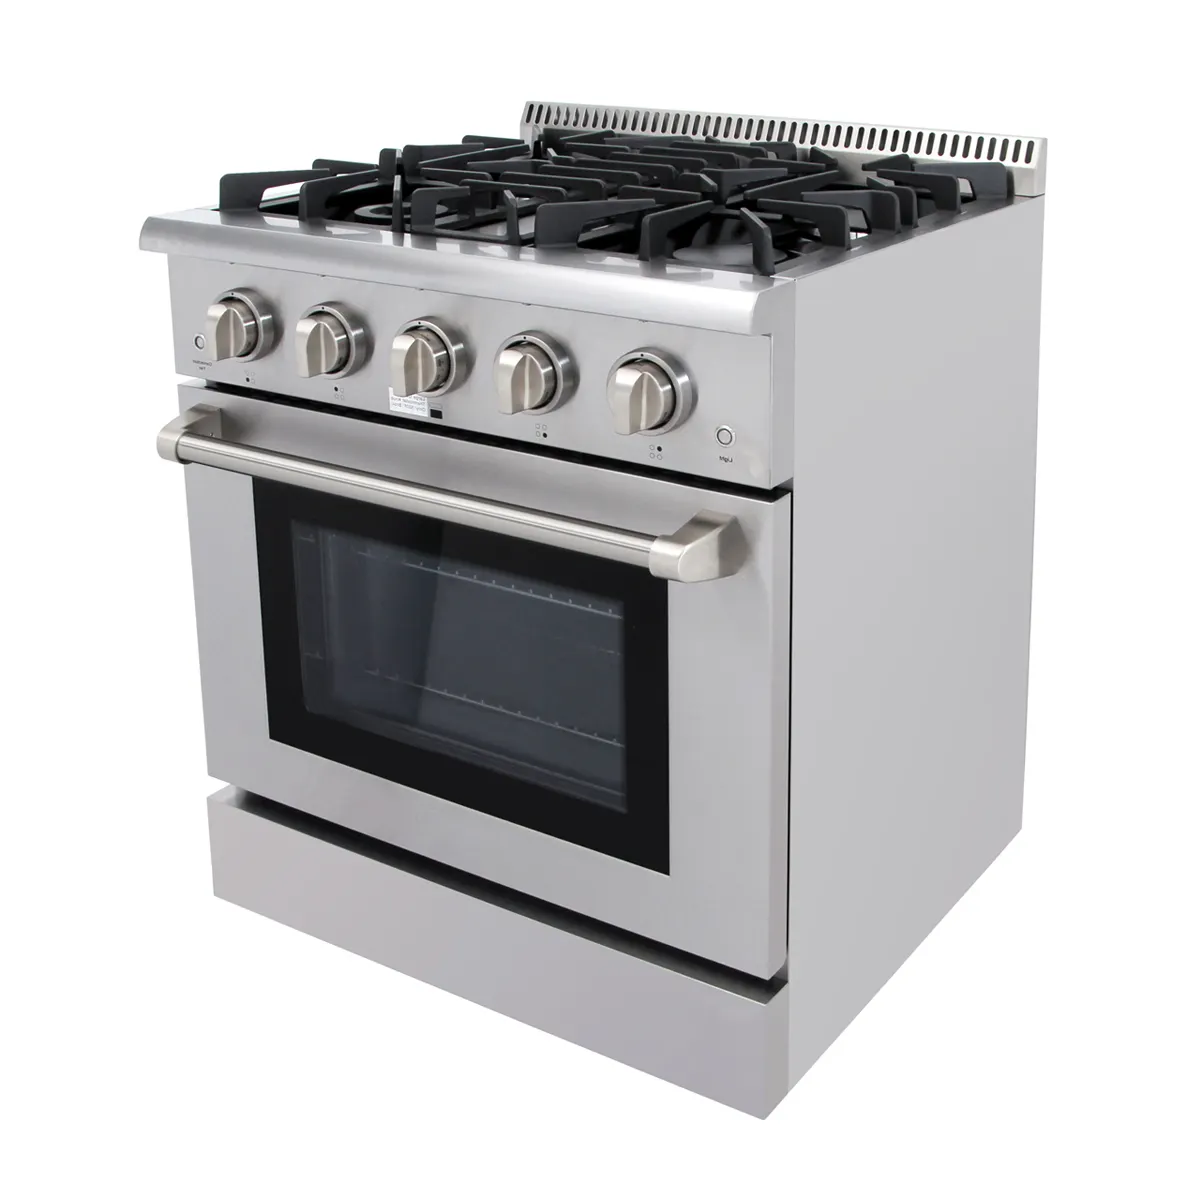 Hyxion 30 "free standing 4 bruciatore fornello a gas fornello/stufa a gas gamma fornello a gas con forno